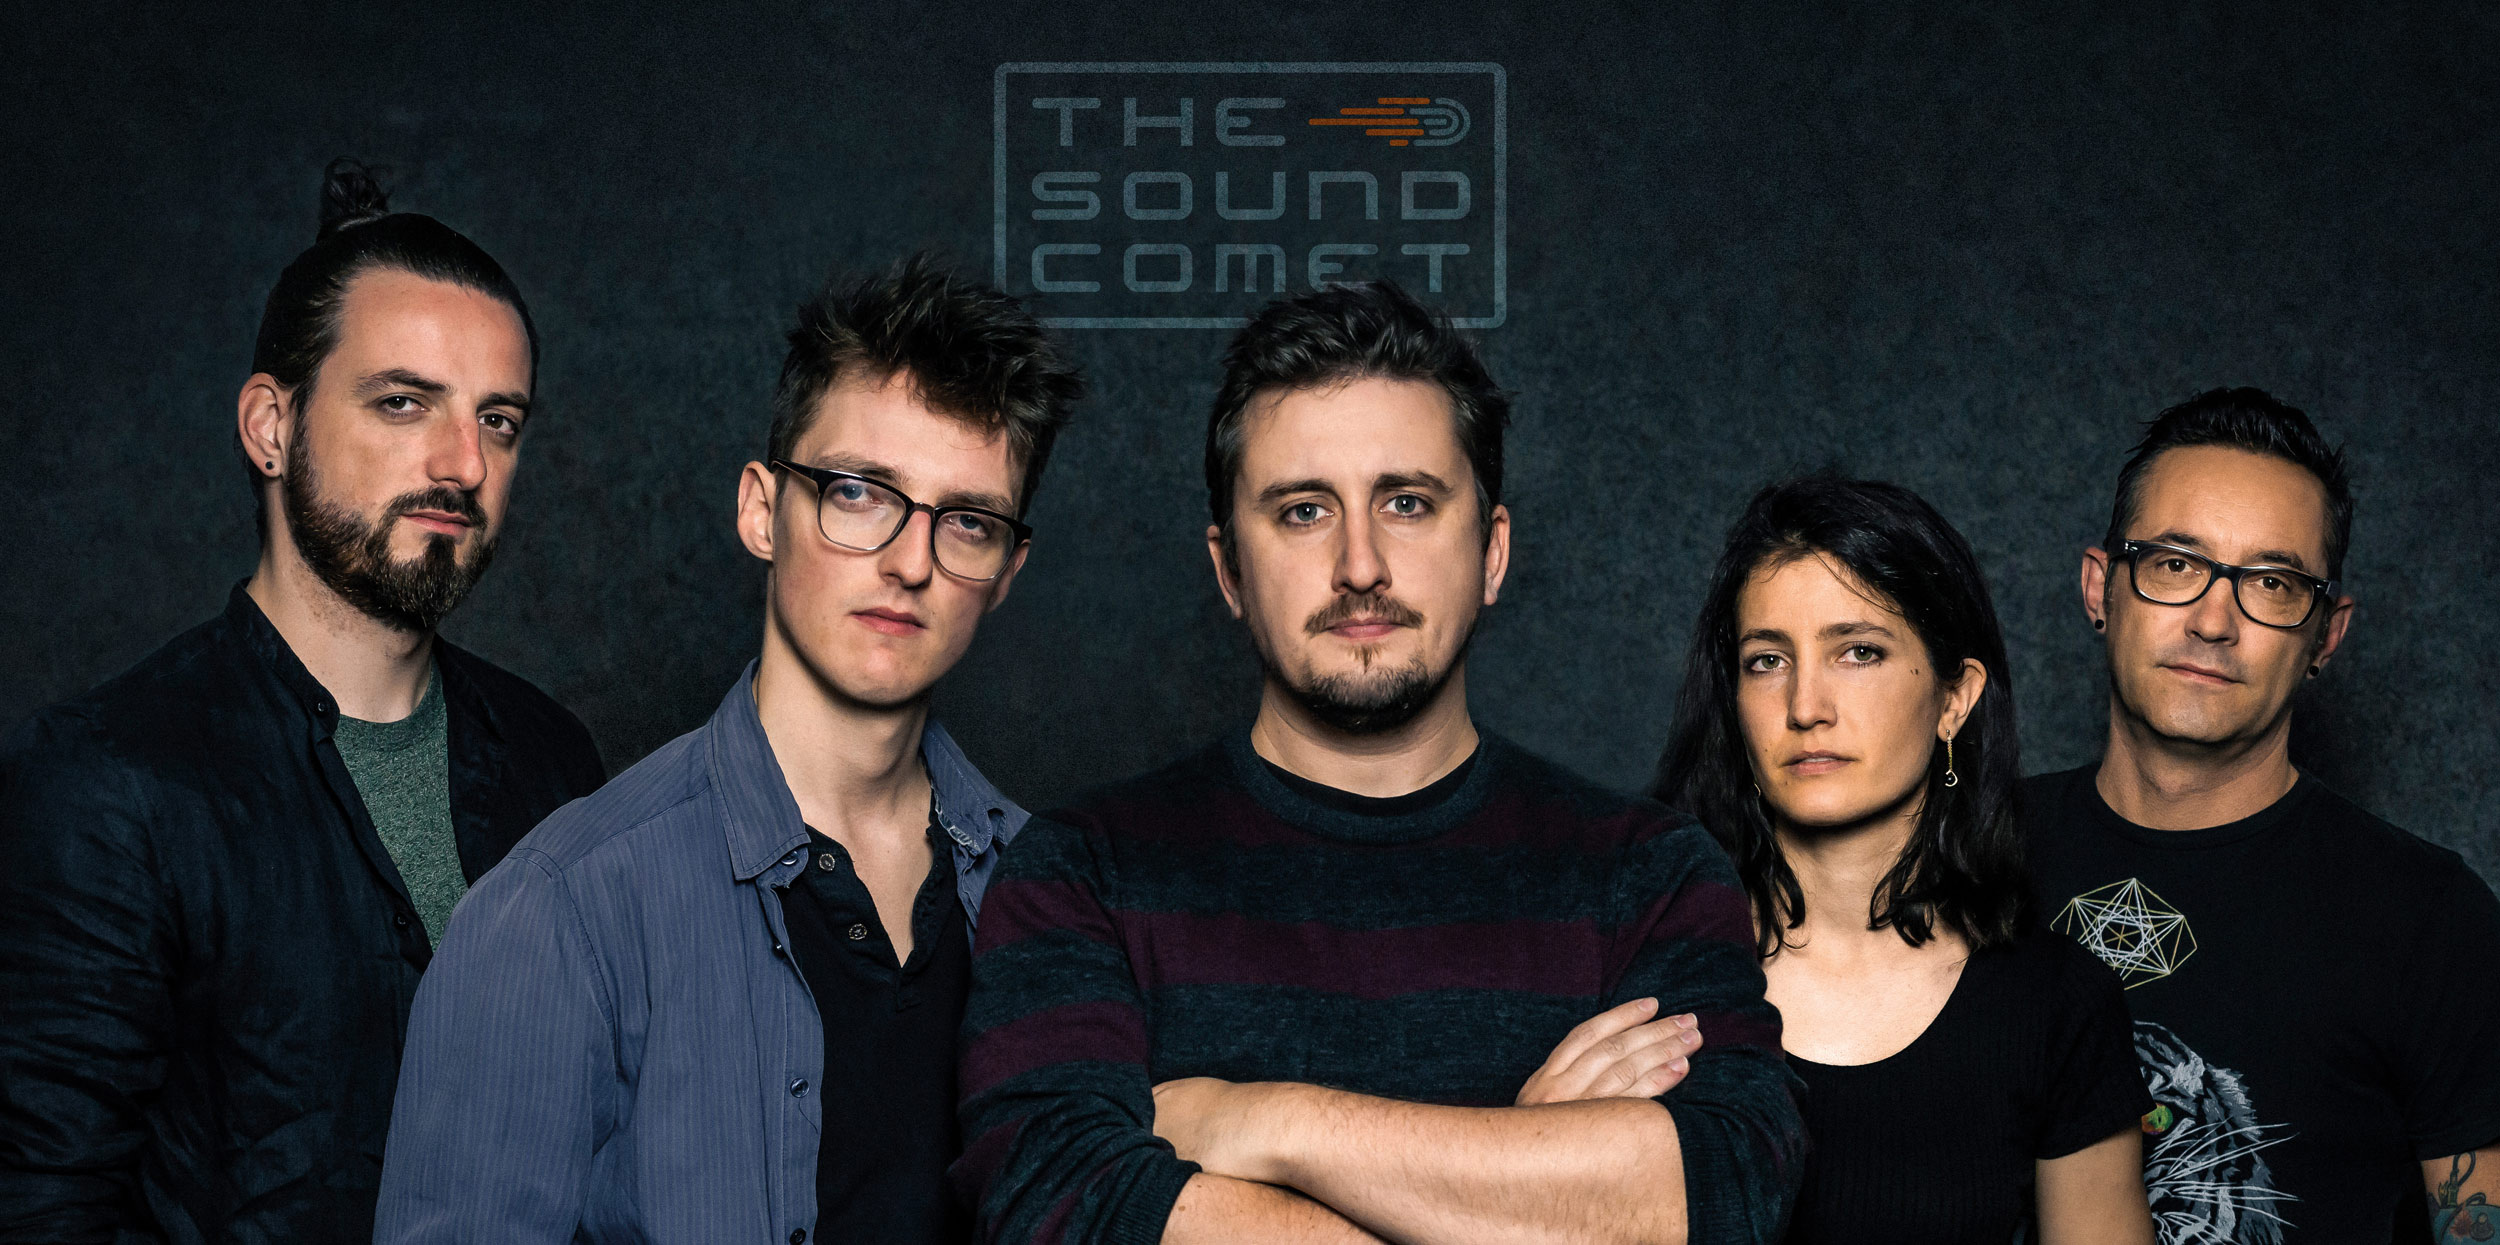 The Sound Comet band photo